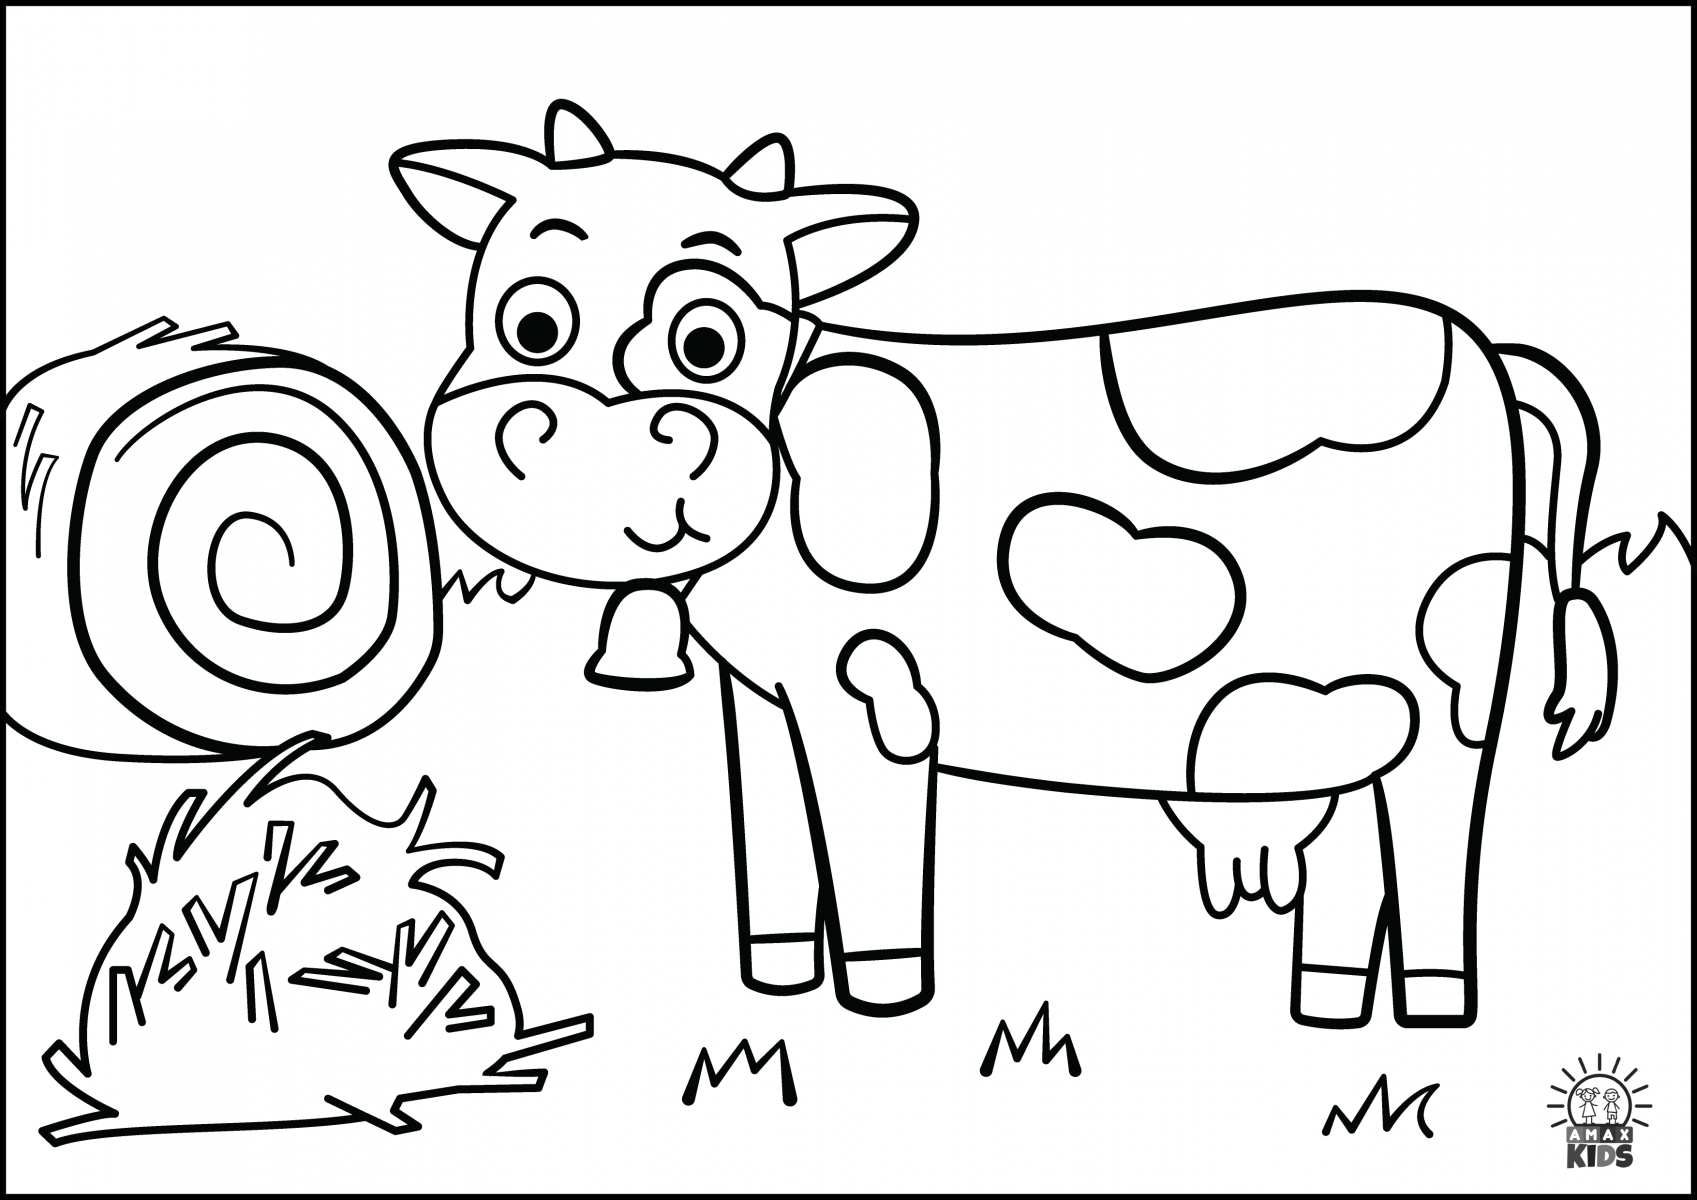 coloring-pages-for-kids-animals-amax-kids